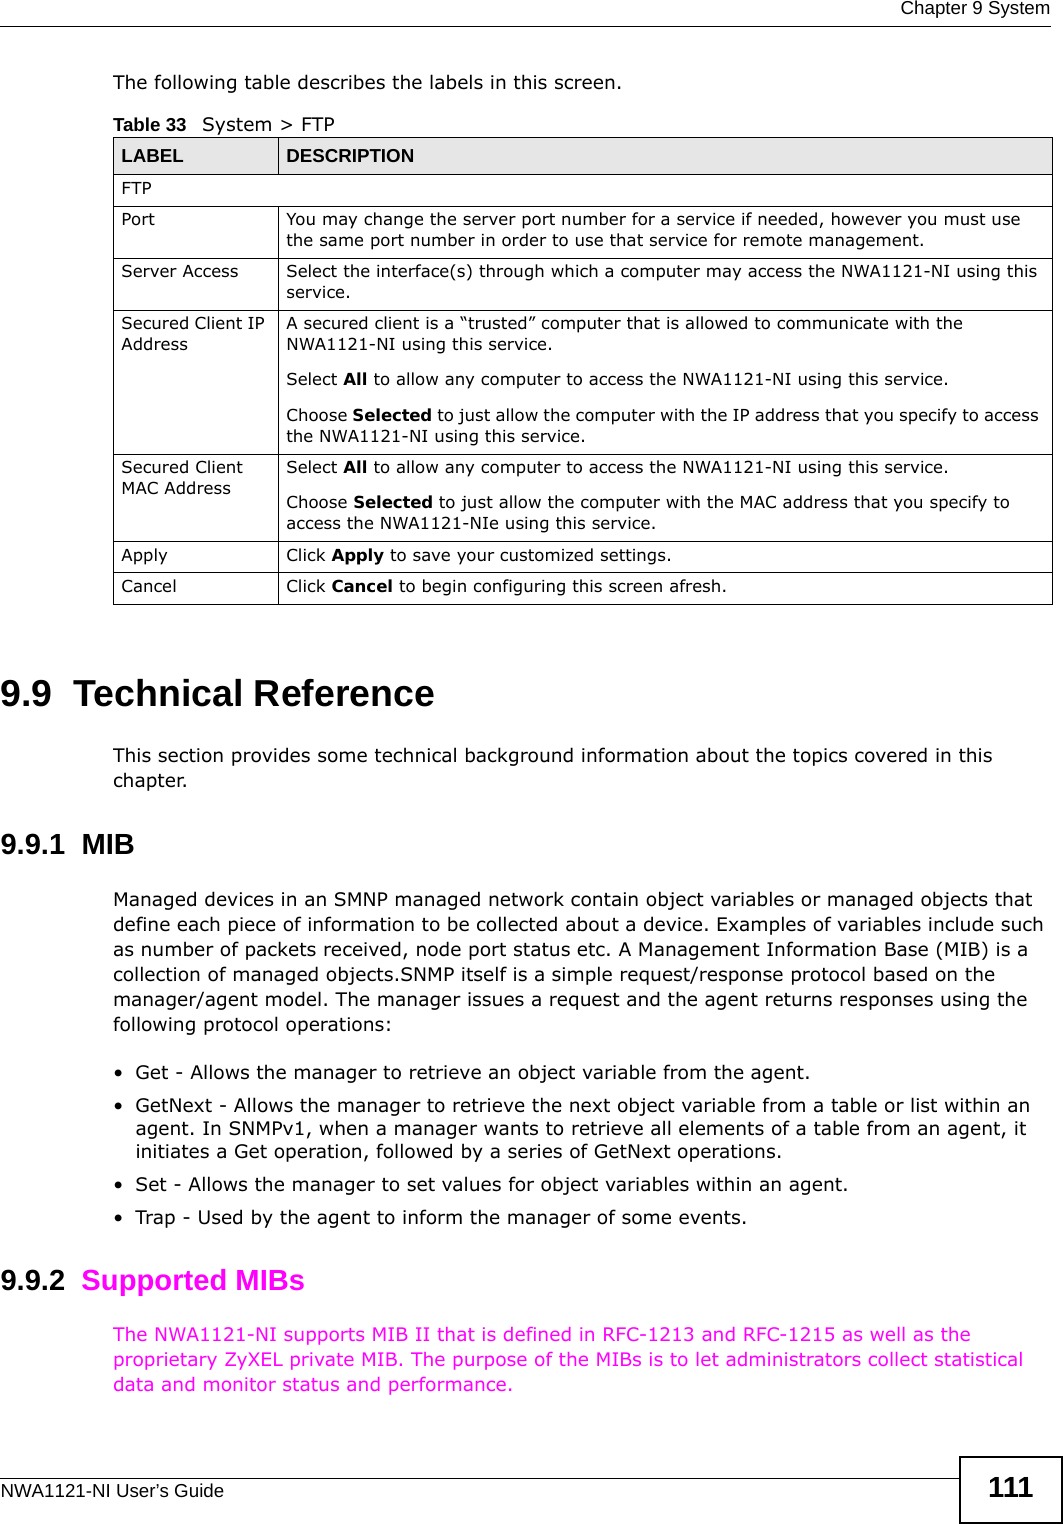  Chapter 9 SystemNWA1121-NI User’s Guide 111The following table describes the labels in this screen.9.9  Technical ReferenceThis section provides some technical background information about the topics covered in this chapter. 9.9.1  MIBManaged devices in an SMNP managed network contain object variables or managed objects that define each piece of information to be collected about a device. Examples of variables include such as number of packets received, node port status etc. A Management Information Base (MIB) is a collection of managed objects.SNMP itself is a simple request/response protocol based on the manager/agent model. The manager issues a request and the agent returns responses using the following protocol operations:• Get - Allows the manager to retrieve an object variable from the agent. • GetNext - Allows the manager to retrieve the next object variable from a table or list within an agent. In SNMPv1, when a manager wants to retrieve all elements of a table from an agent, it initiates a Get operation, followed by a series of GetNext operations. • Set - Allows the manager to set values for object variables within an agent. • Trap - Used by the agent to inform the manager of some events.9.9.2  Supported MIBsThe NWA1121-NI supports MIB II that is defined in RFC-1213 and RFC-1215 as well as the proprietary ZyXEL private MIB. The purpose of the MIBs is to let administrators collect statistical data and monitor status and performance.Table 33   System &gt; FTPLABEL DESCRIPTIONFTPPort You may change the server port number for a service if needed, however you must use the same port number in order to use that service for remote management.Server Access Select the interface(s) through which a computer may access the NWA1121-NI using this service.Secured Client IP AddressA secured client is a “trusted” computer that is allowed to communicate with the NWA1121-NI using this service. Select All to allow any computer to access the NWA1121-NI using this service.Choose Selected to just allow the computer with the IP address that you specify to access the NWA1121-NI using this service.Secured Client MAC AddressSelect All to allow any computer to access the NWA1121-NI using this service.Choose Selected to just allow the computer with the MAC address that you specify to access the NWA1121-NIe using this service.Apply Click Apply to save your customized settings. Cancel Click Cancel to begin configuring this screen afresh.